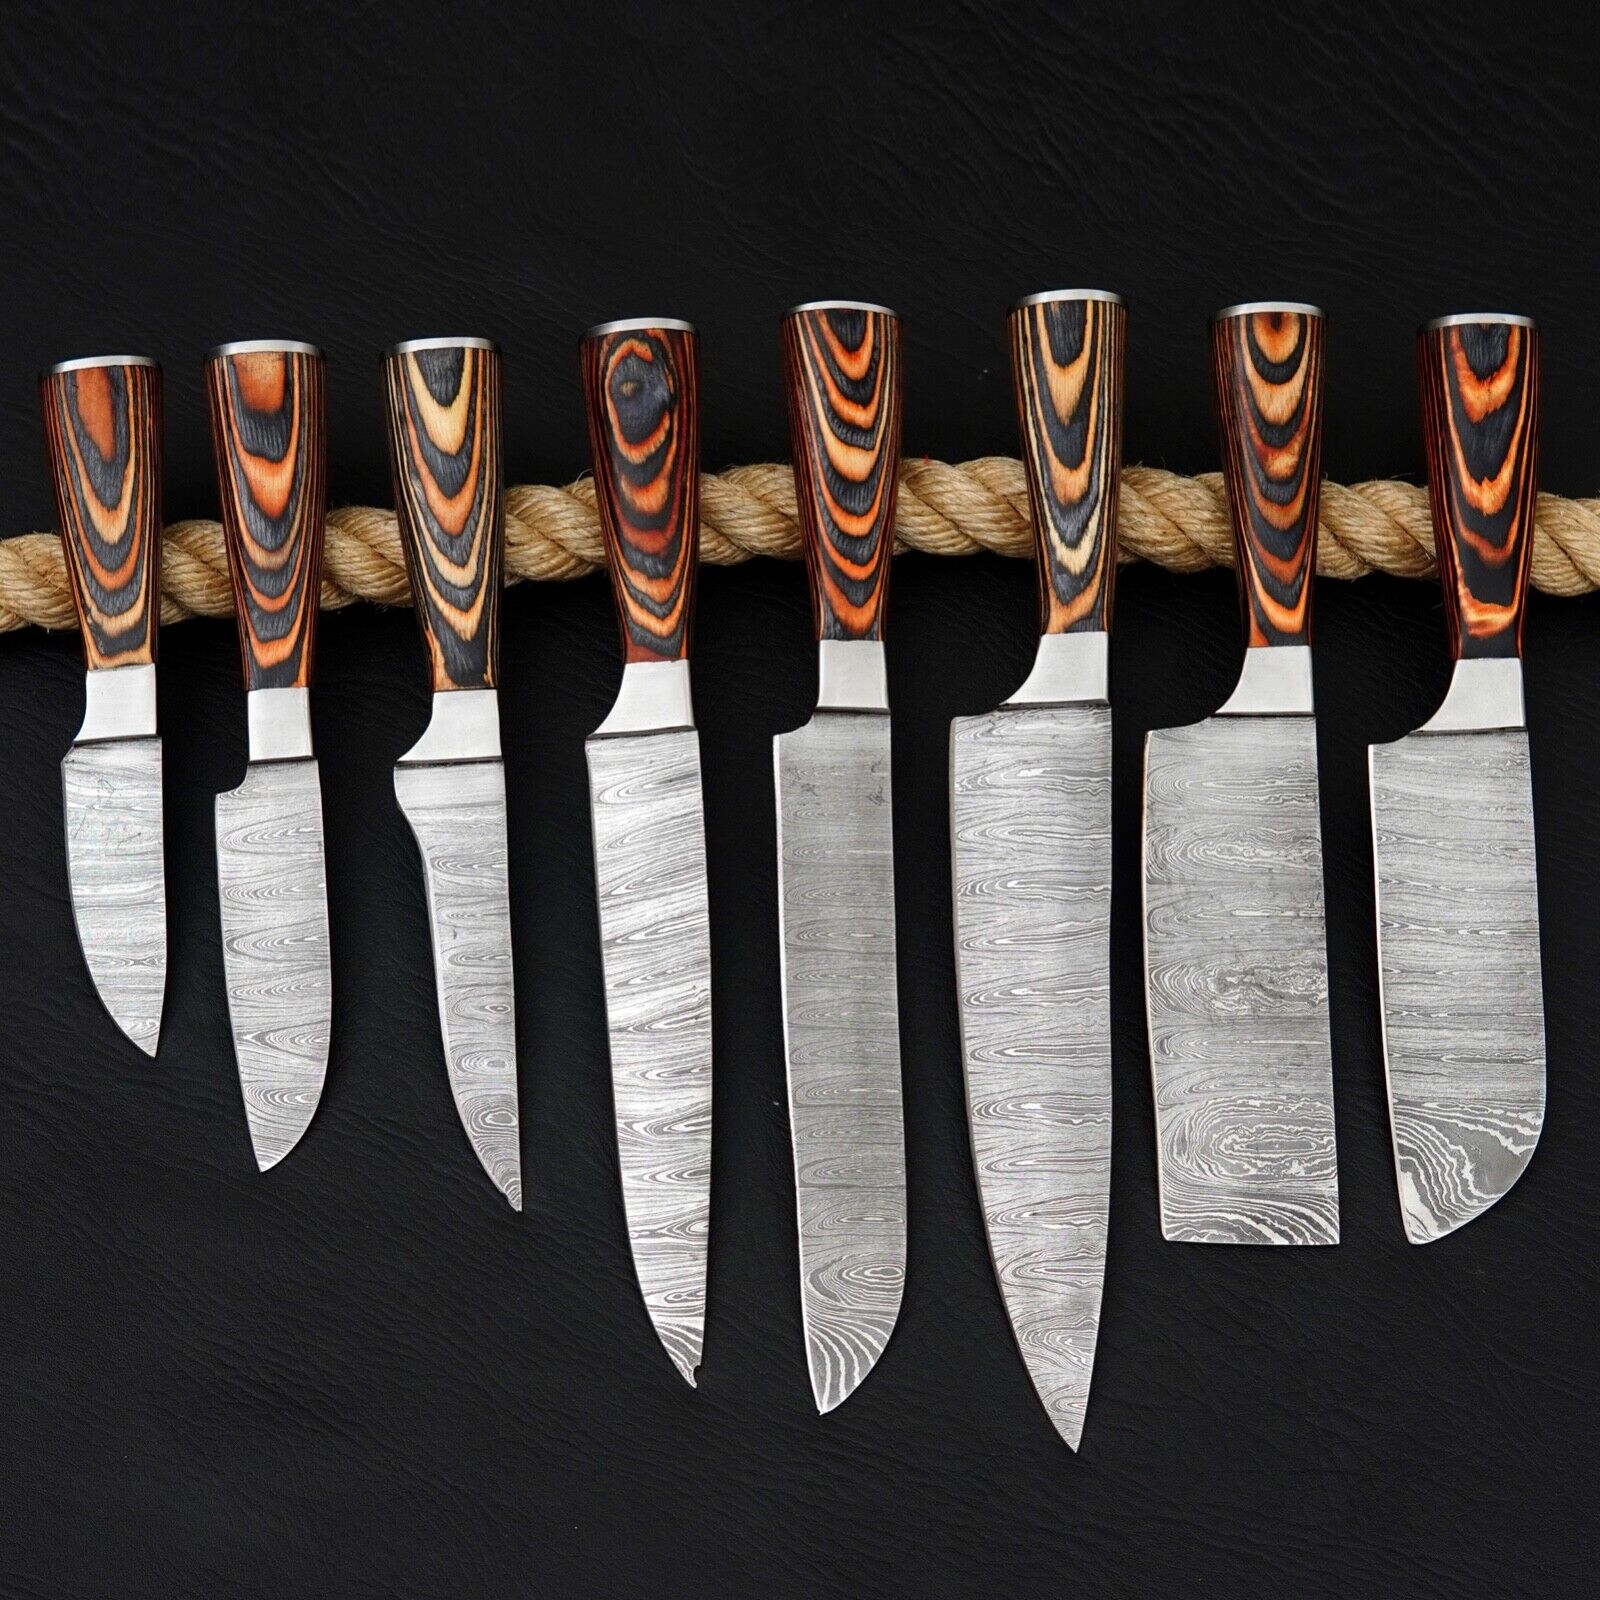 HAND FORGED DAMASCUS STEEL CHEF KITCHEN KNIFE SET WITH WOOD HANDLE +SHEATH